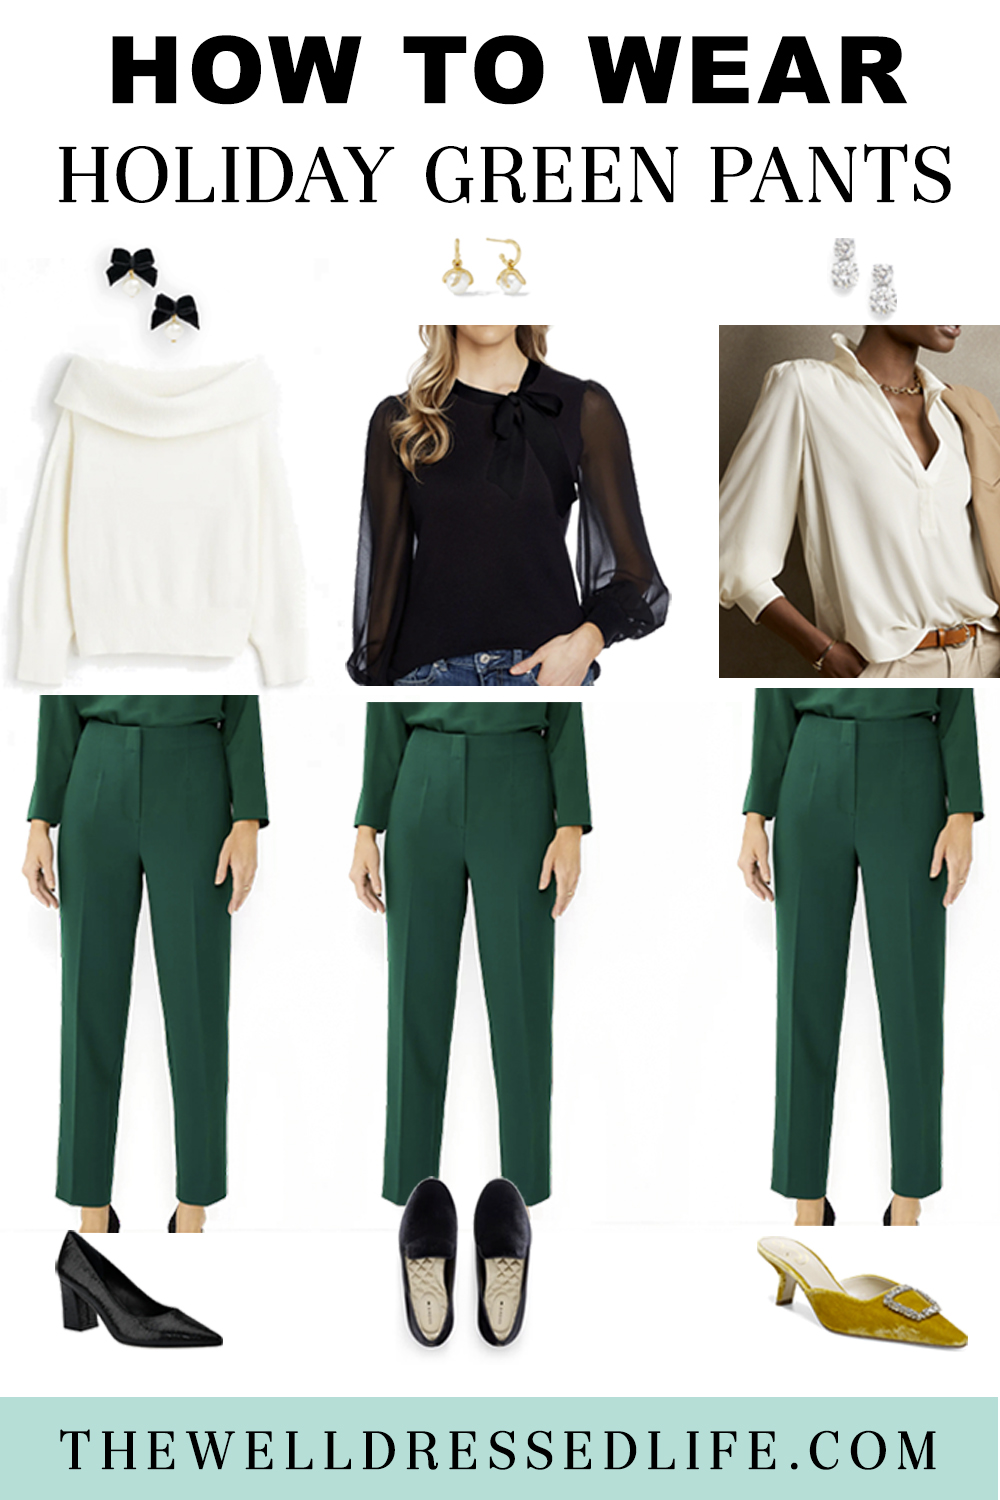 How to Wear Holiday Green Pants